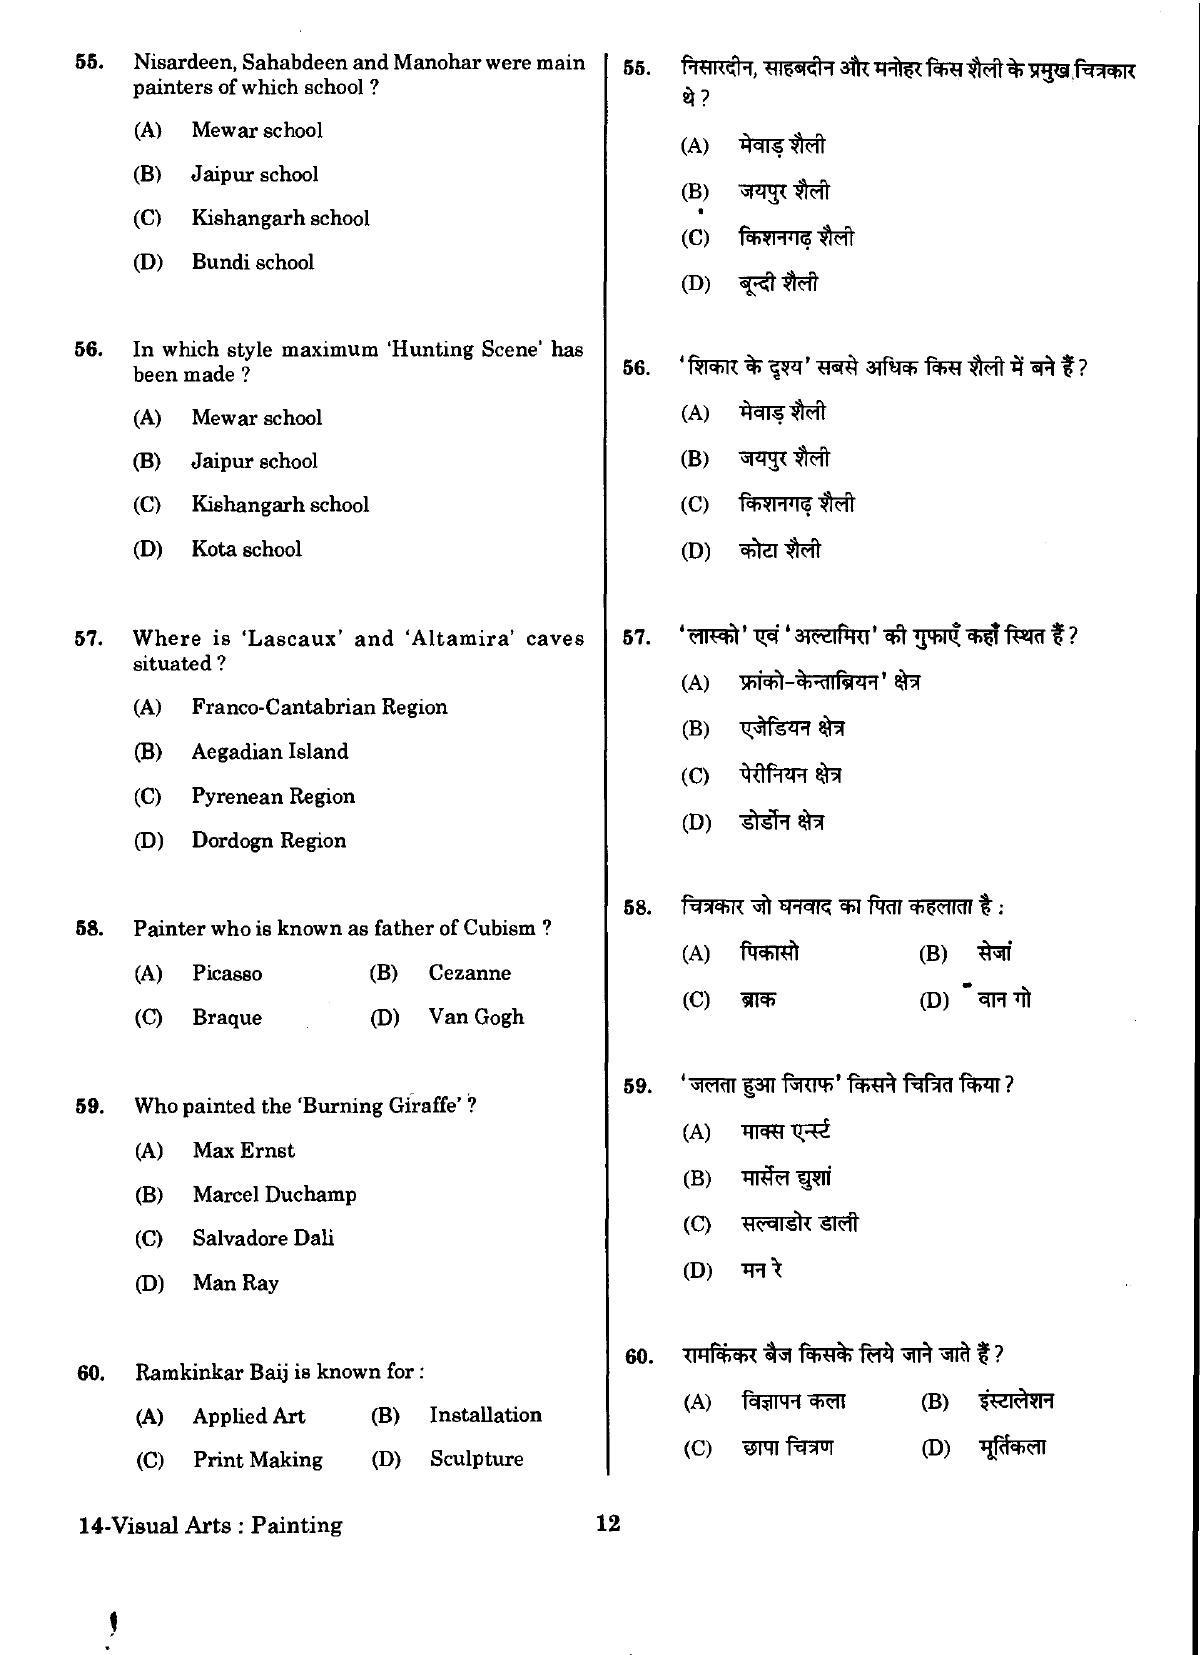 URATPG Visual Arts Painting Sample Question Paper 2018 - Page 11